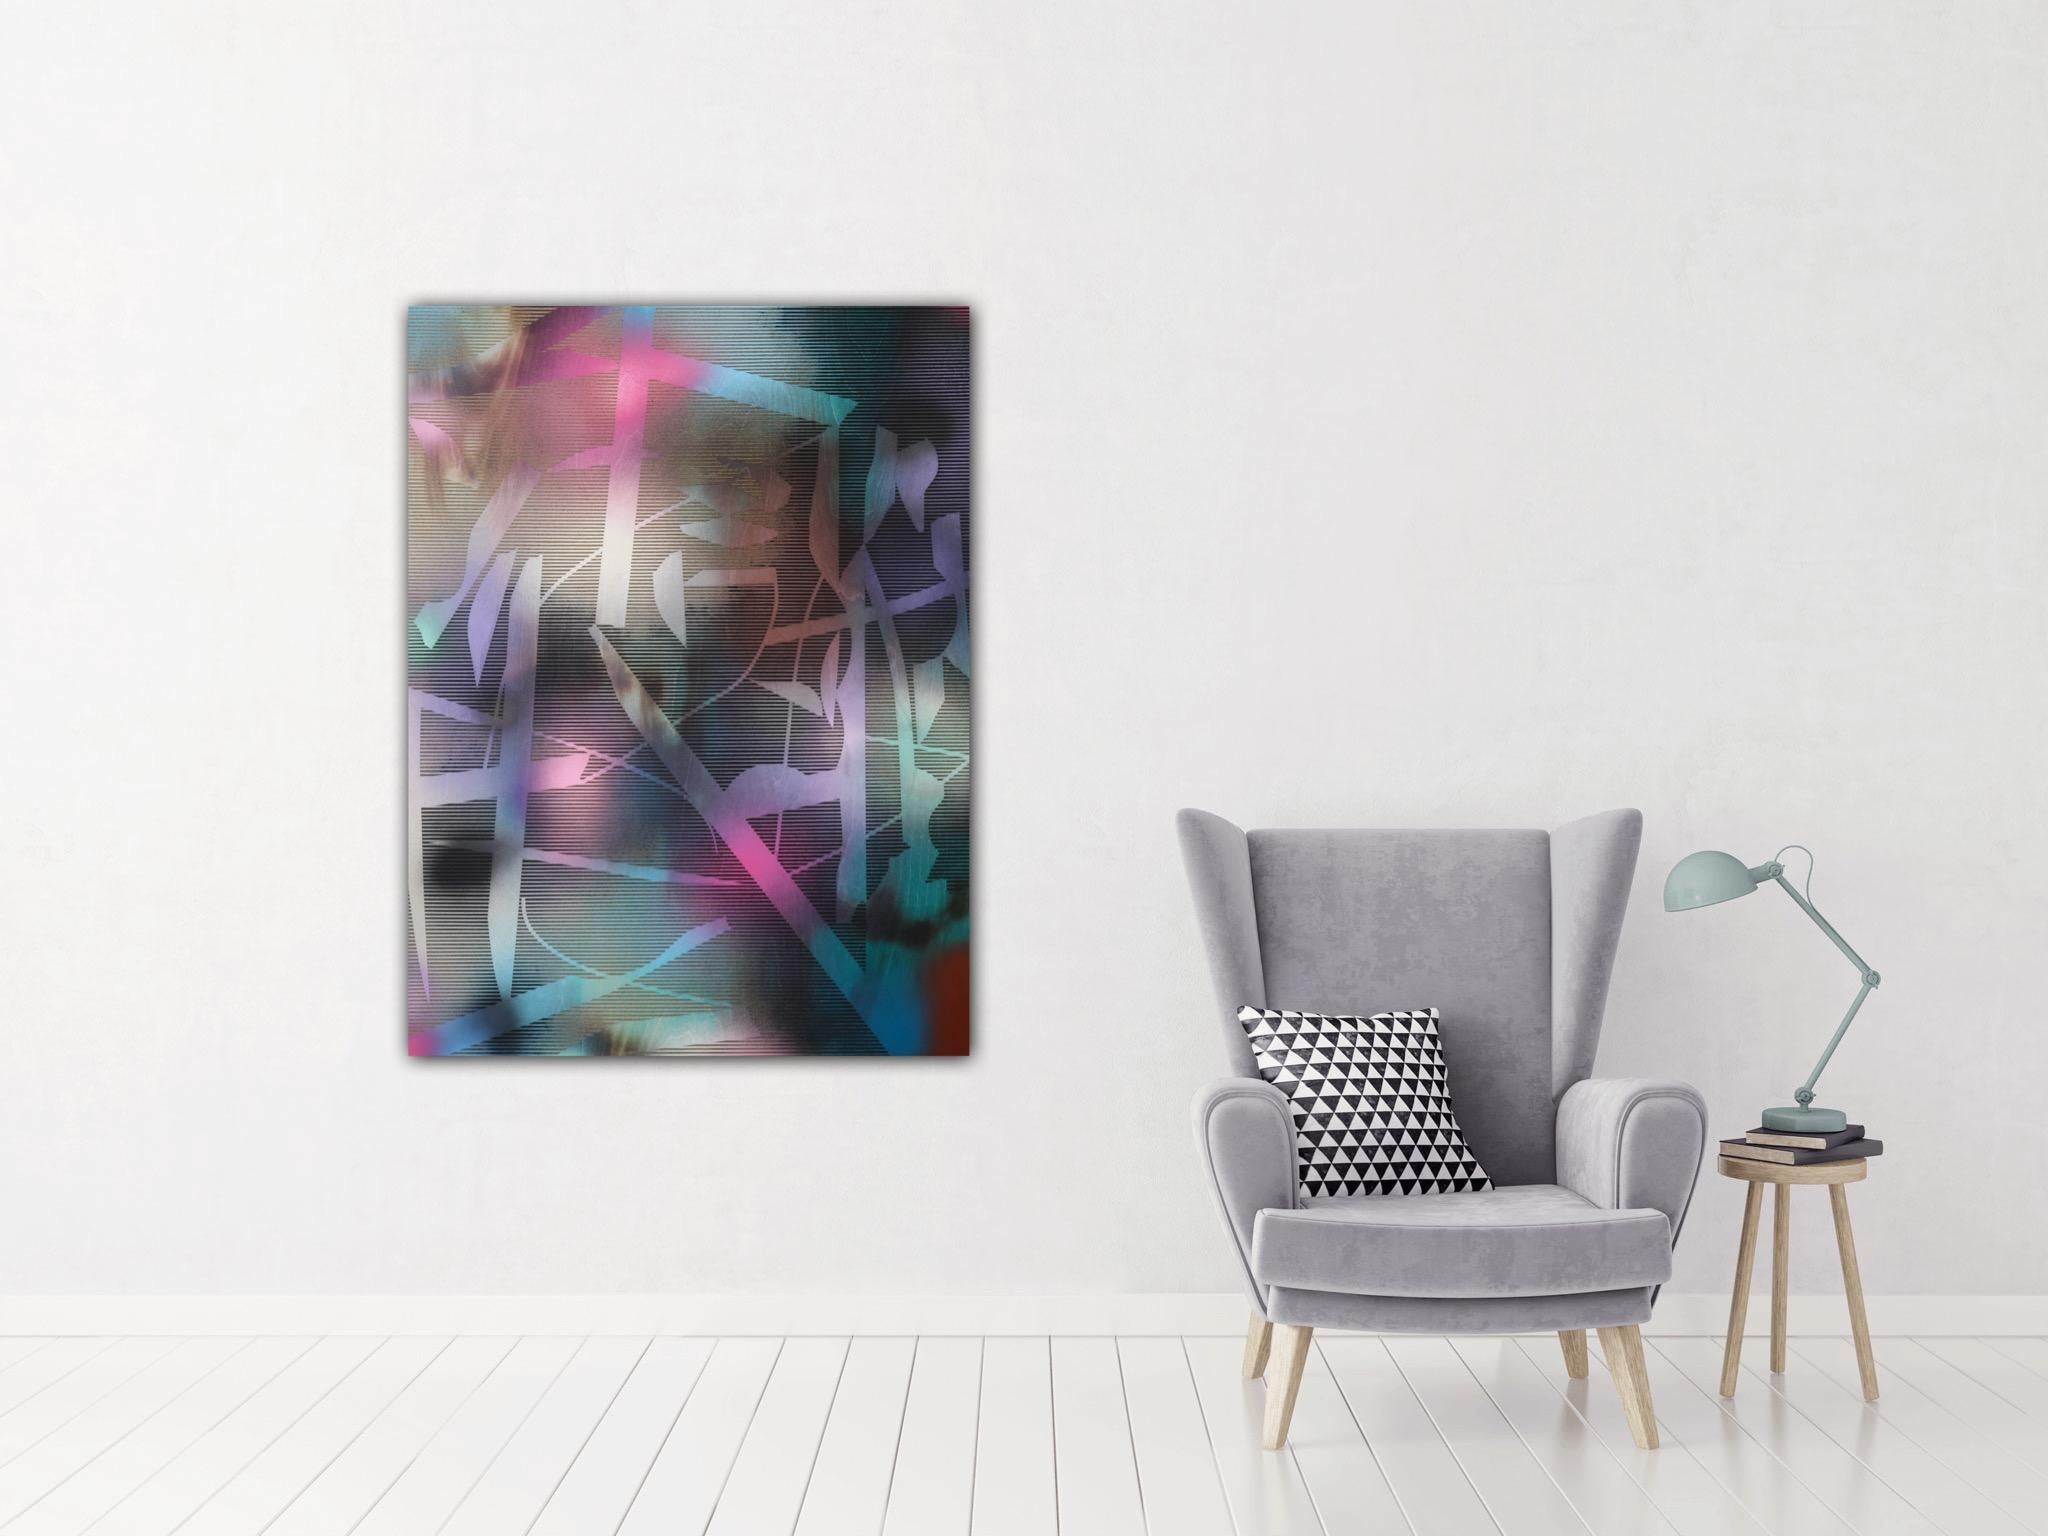 in City and in Forest 29 (grid painting abstract wood contemporary jewel tones) - Abstract Geometric Painting by Melisa Taylor Metzger